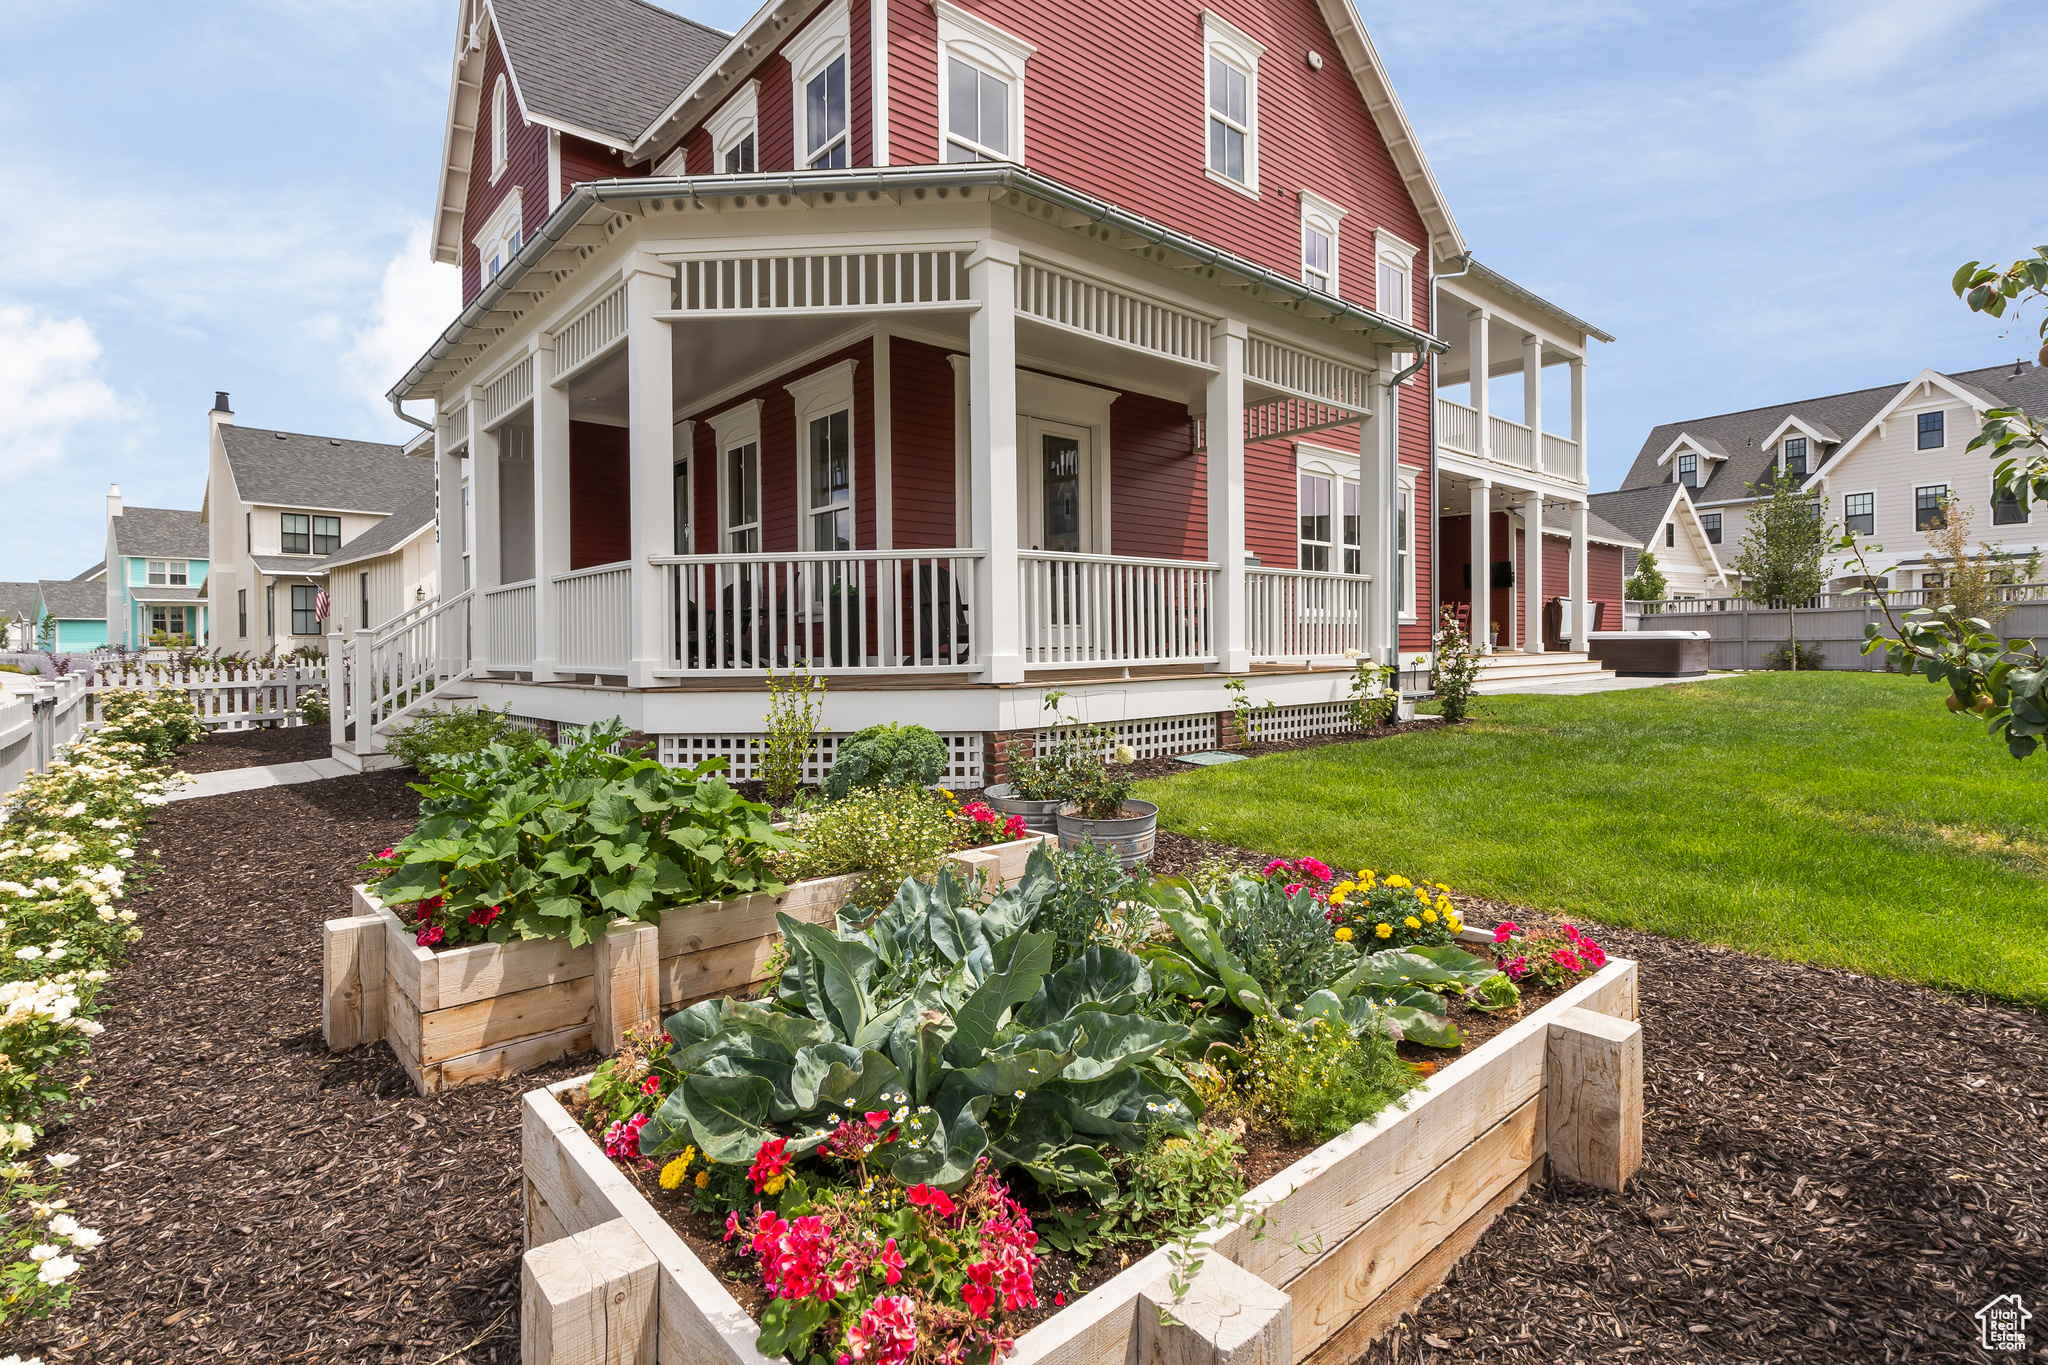 View of property exterior with a lawn and raised vegetable beds